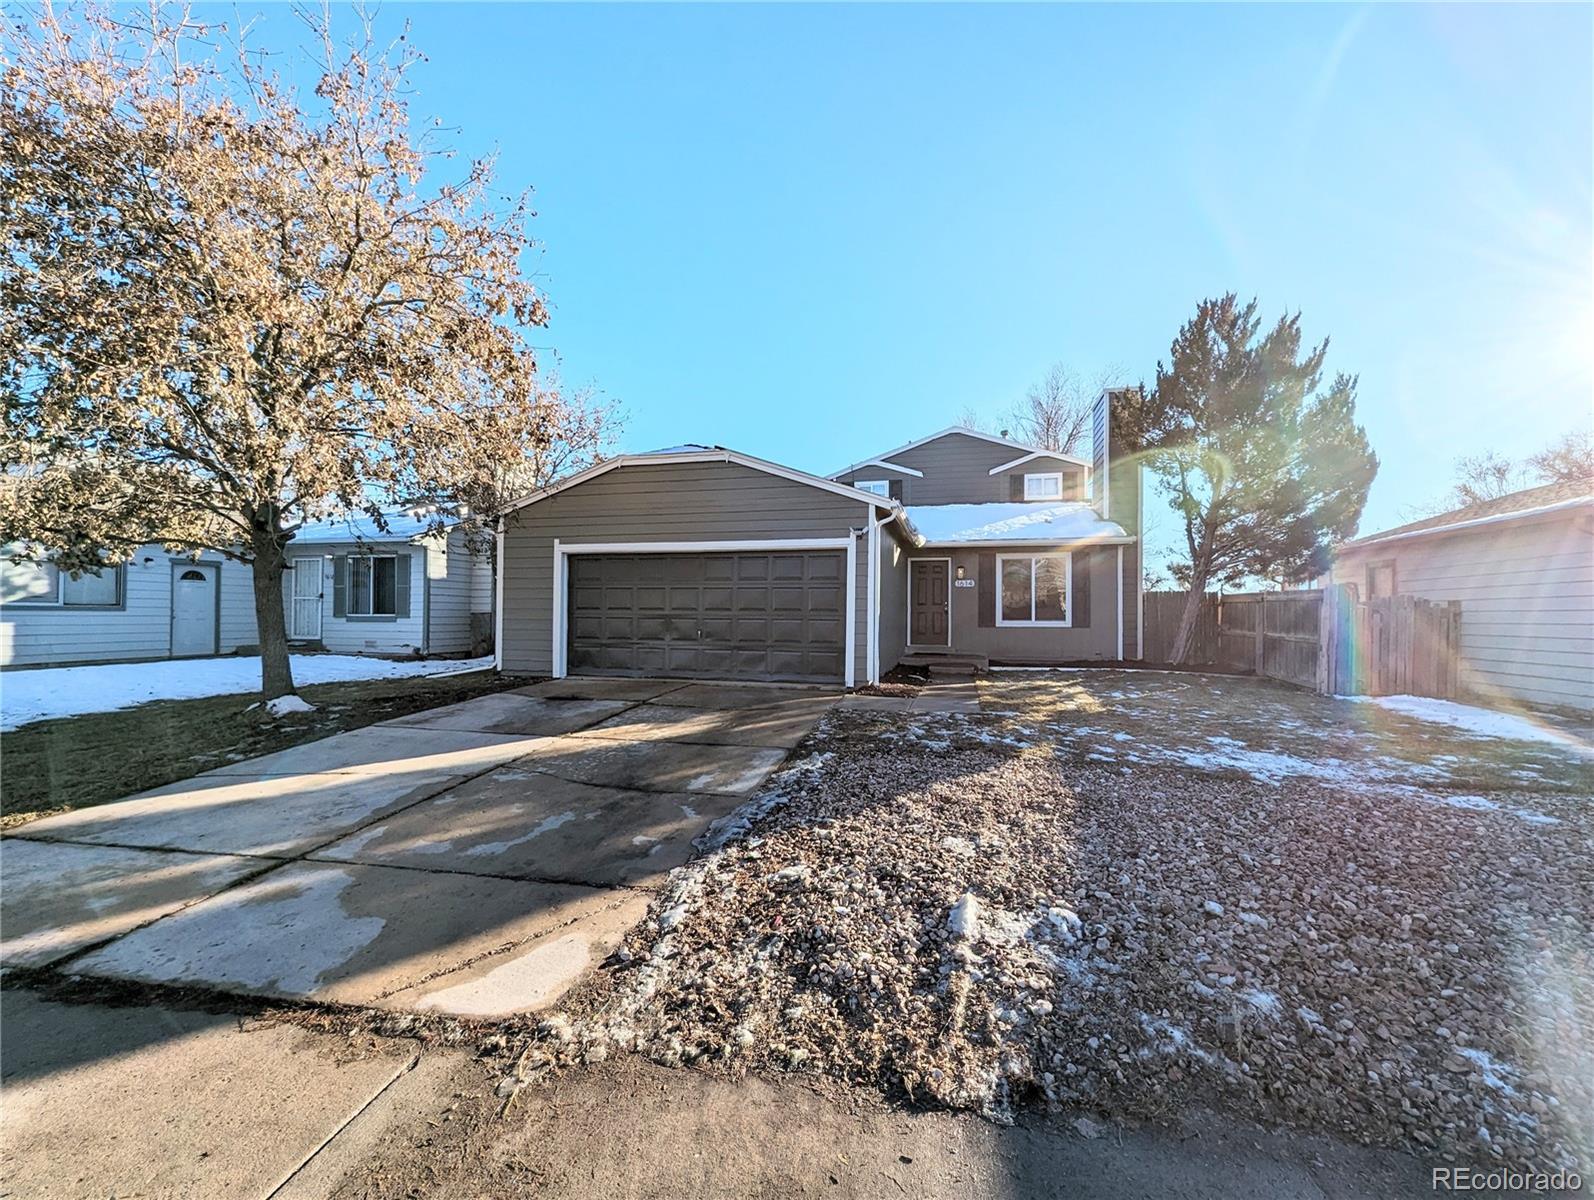 1614  ensenada way, aurora sold home. Closed on 2024-02-28 for $462,500.